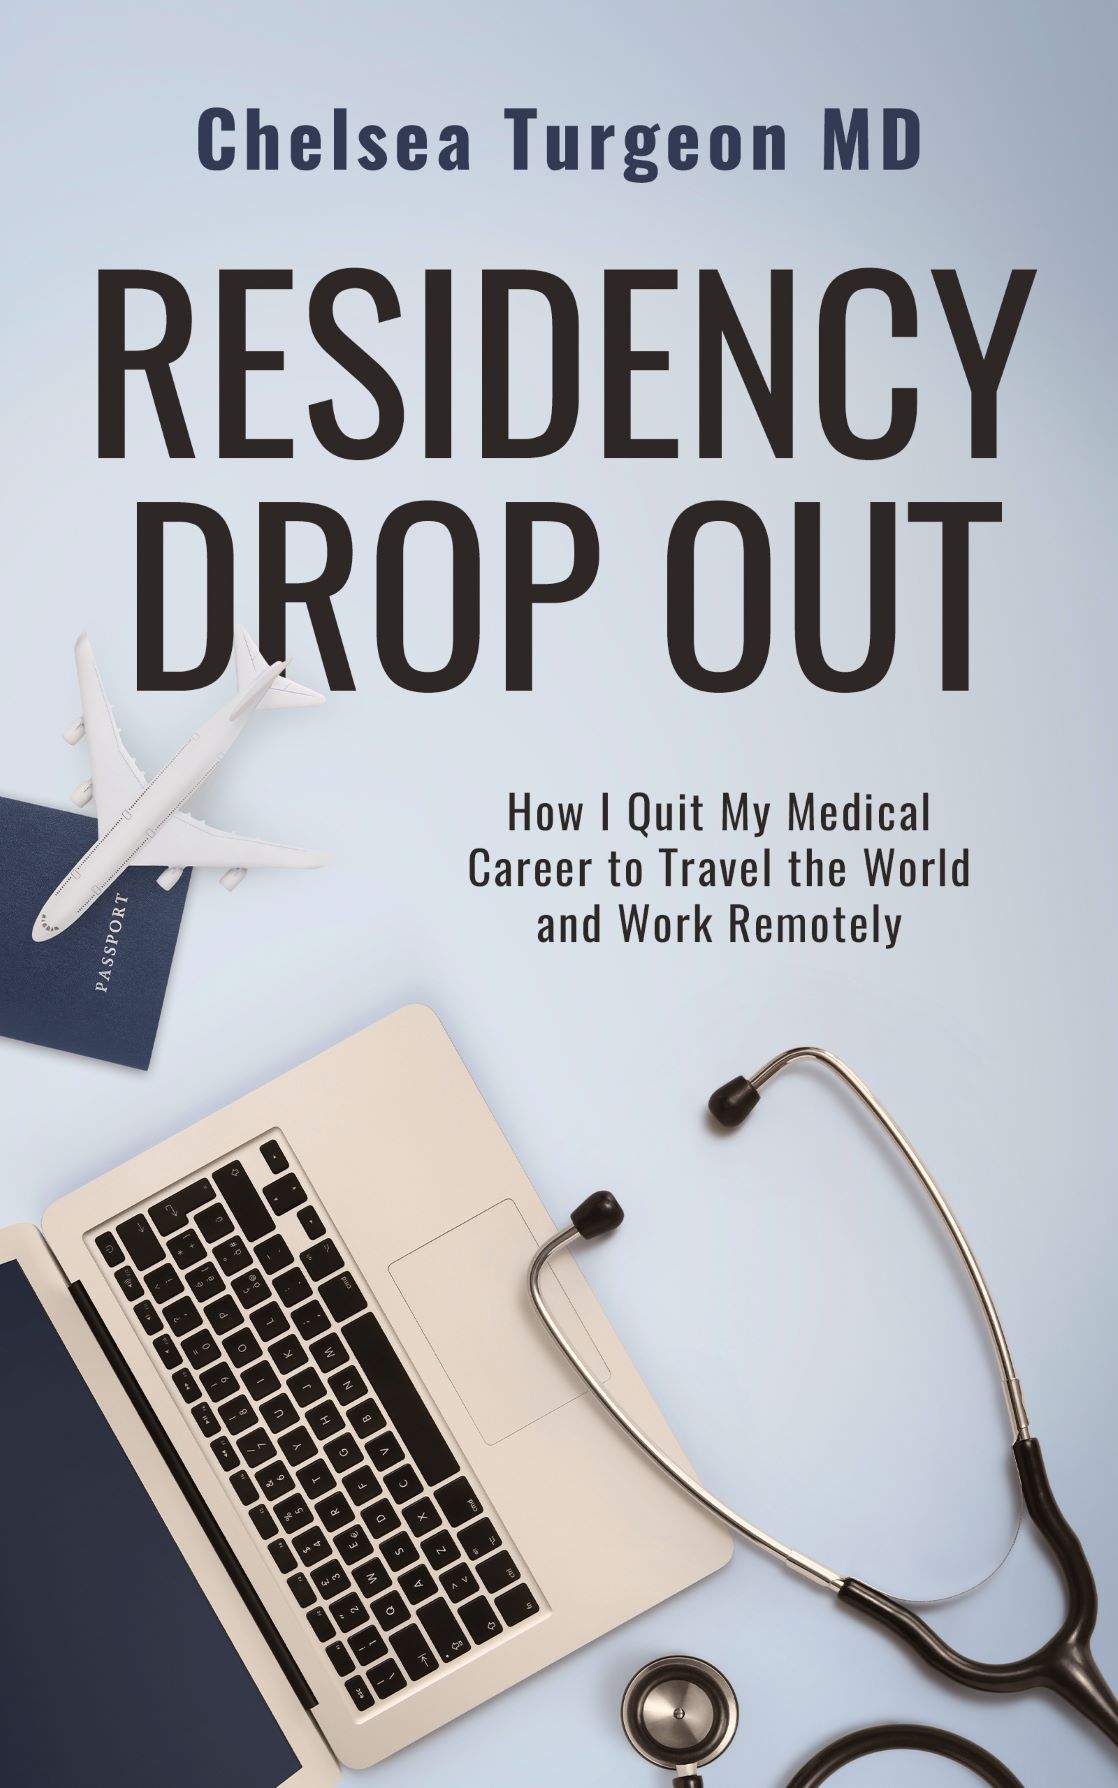 FREE: Residency Drop Out: How I Quit my Medical Career to Travel the World and Work Remotely by Chelsea Turgeon